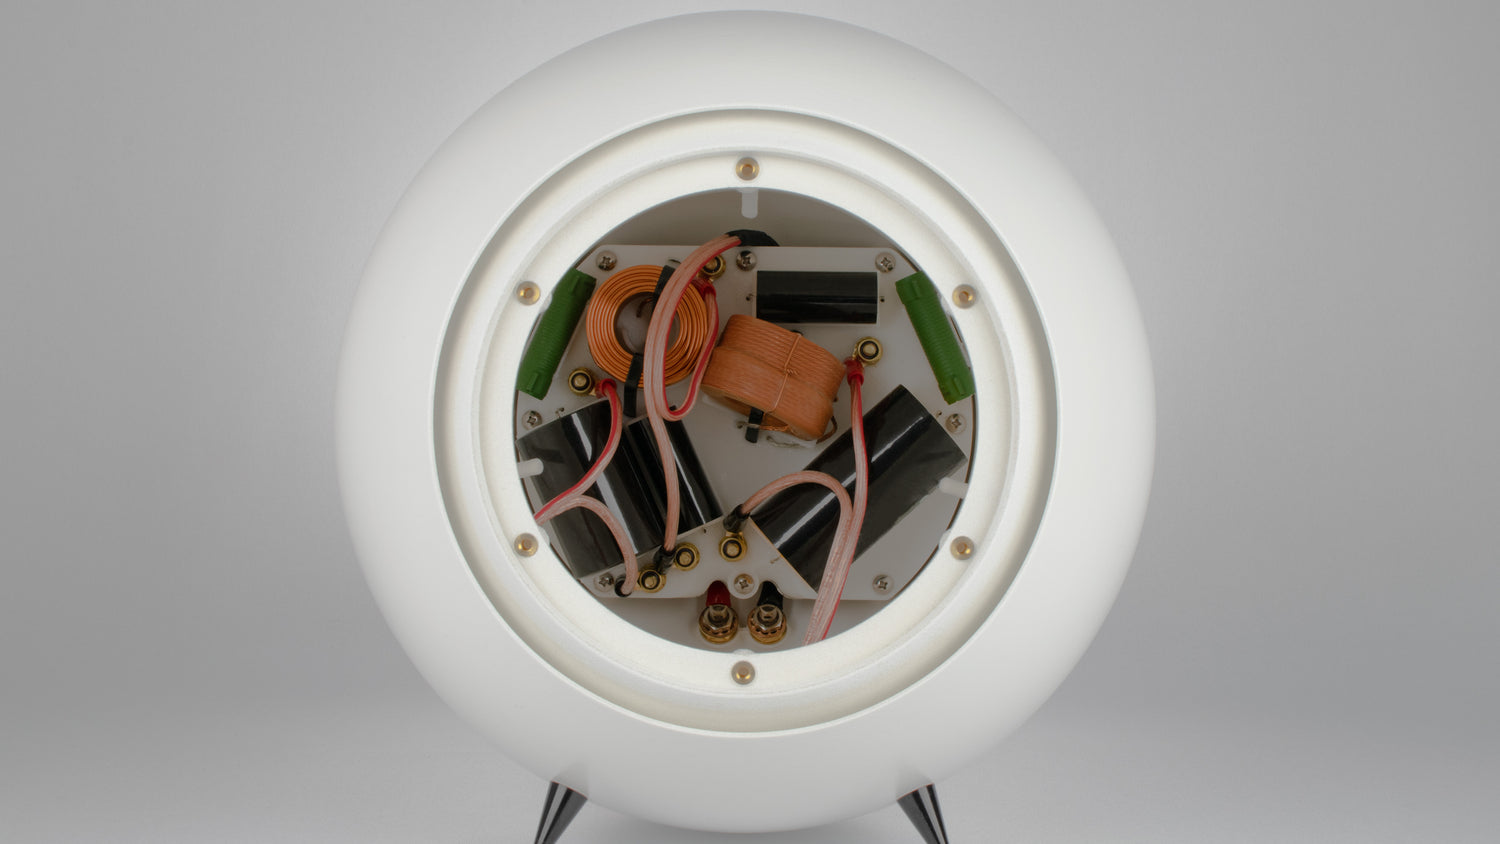 Front inside view of Iris Audio speakers without speaker/driver.